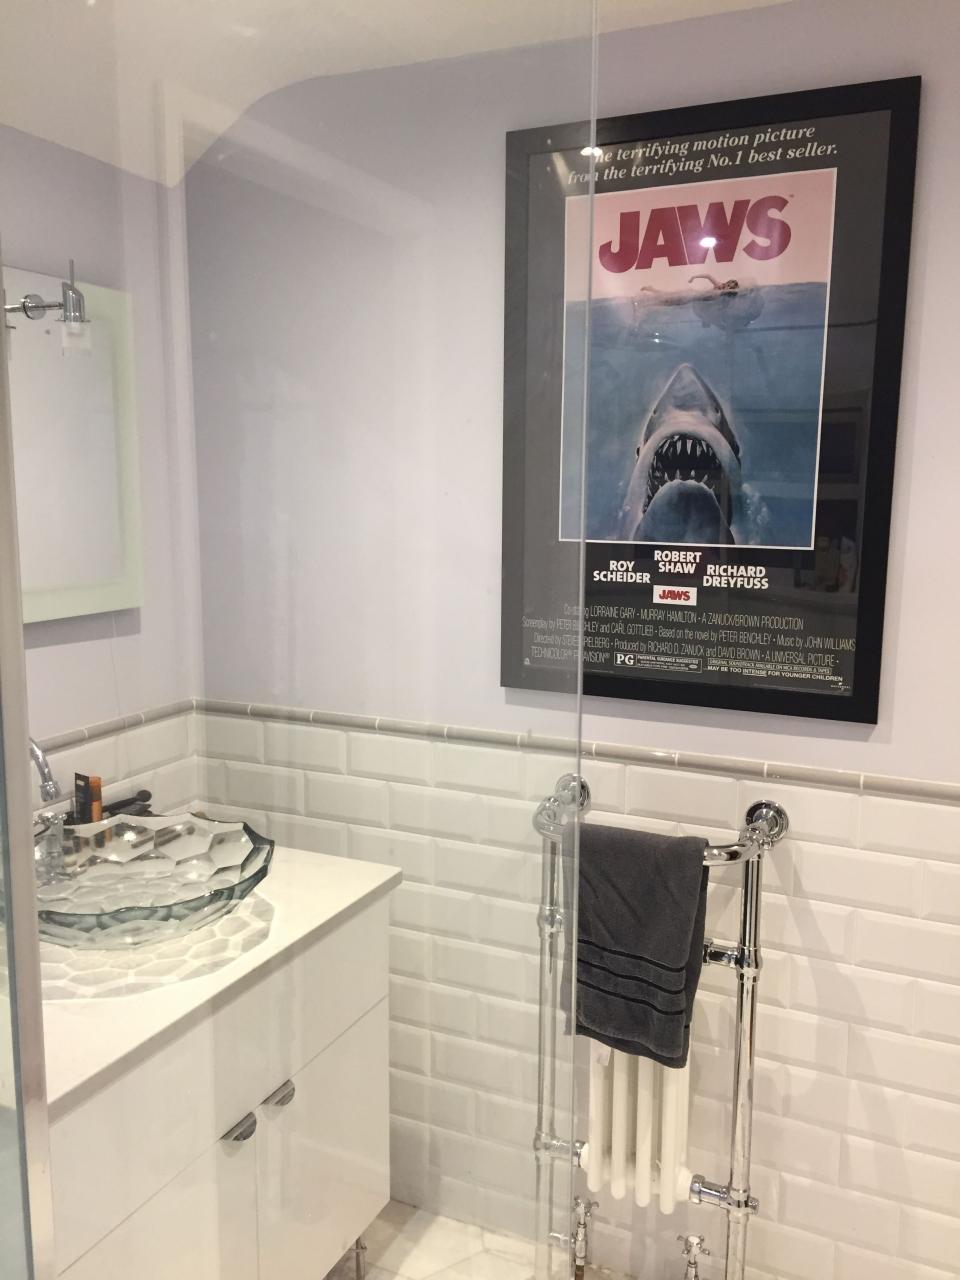 The bathroom. Beautiful Kohler glass basin and Jaws poster Glass